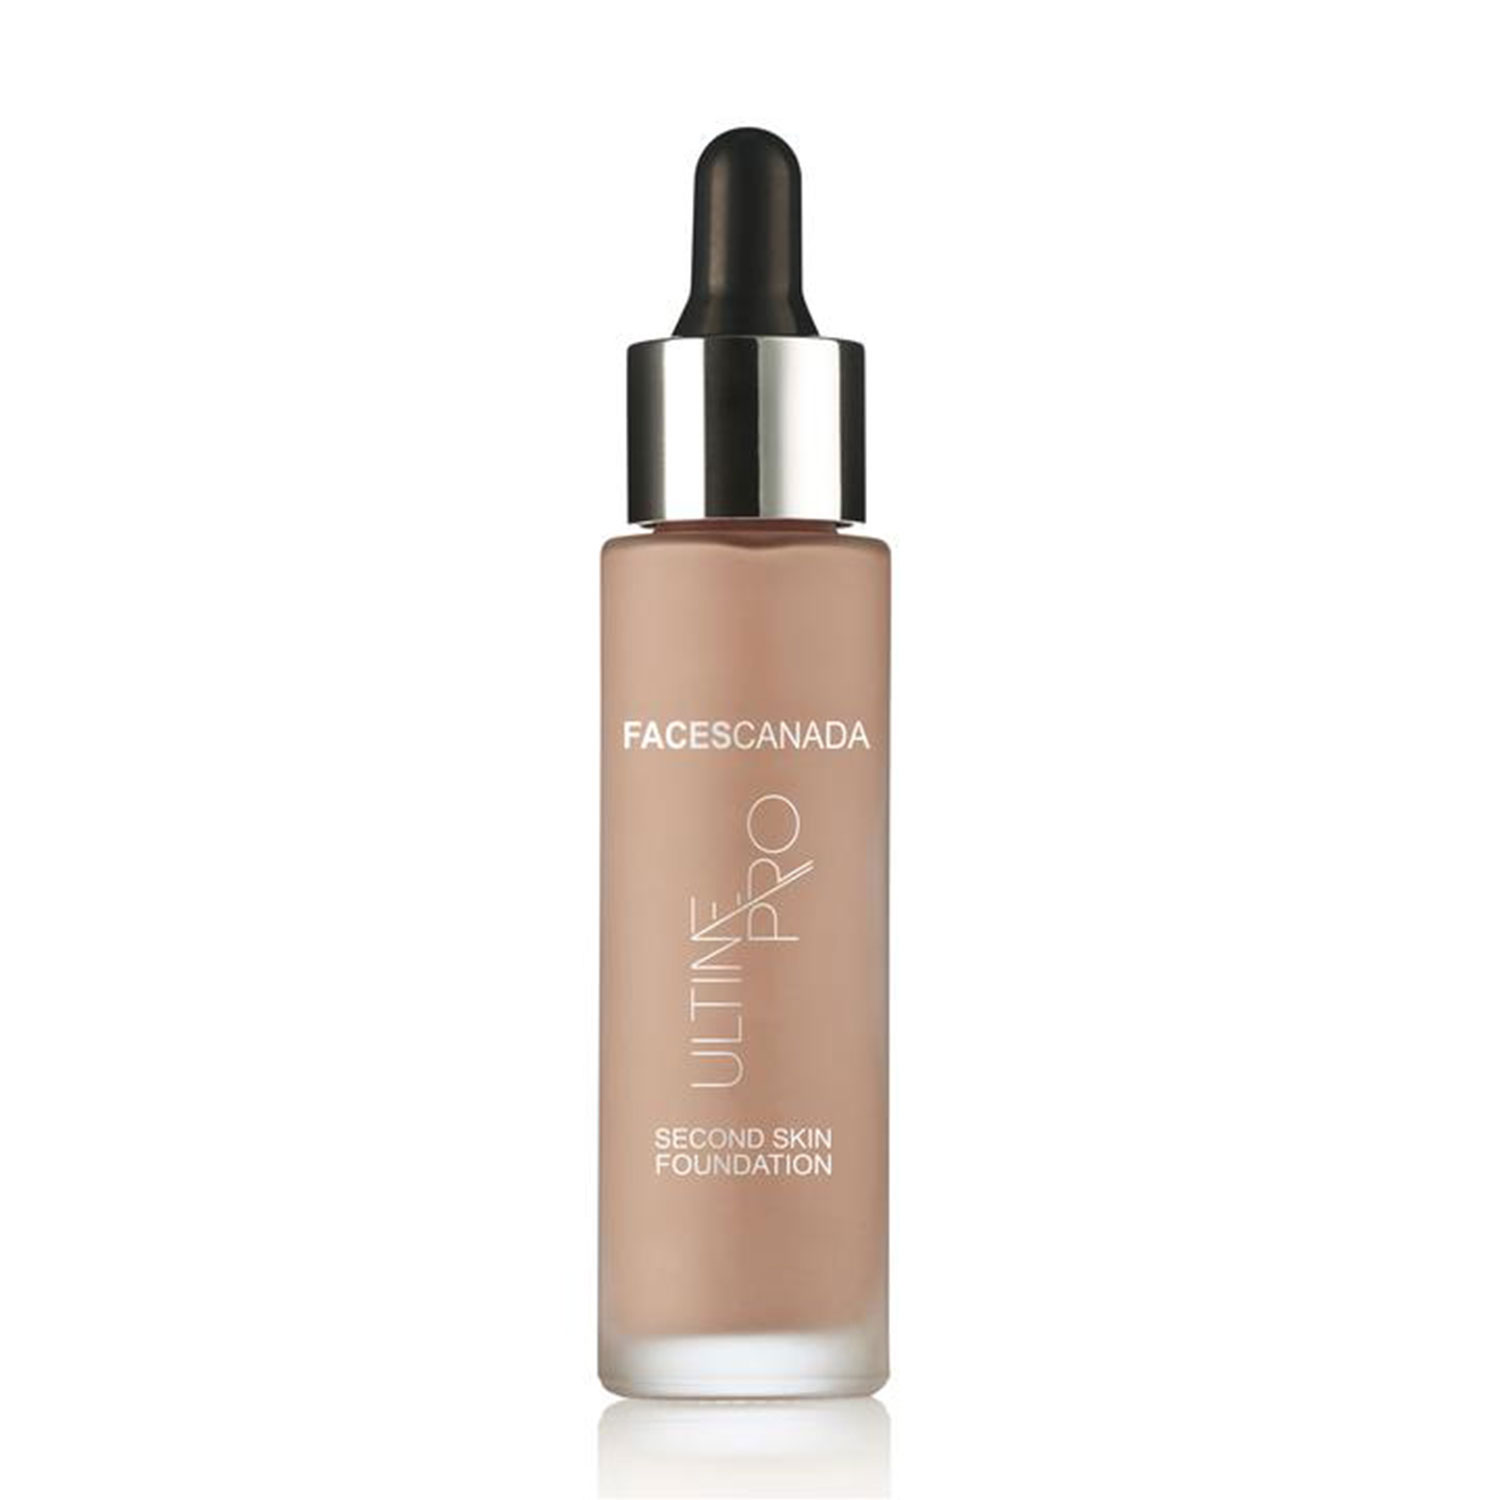 Faces Canada Ultime Pro Second Skin Foundation, 30ml-Beige 03